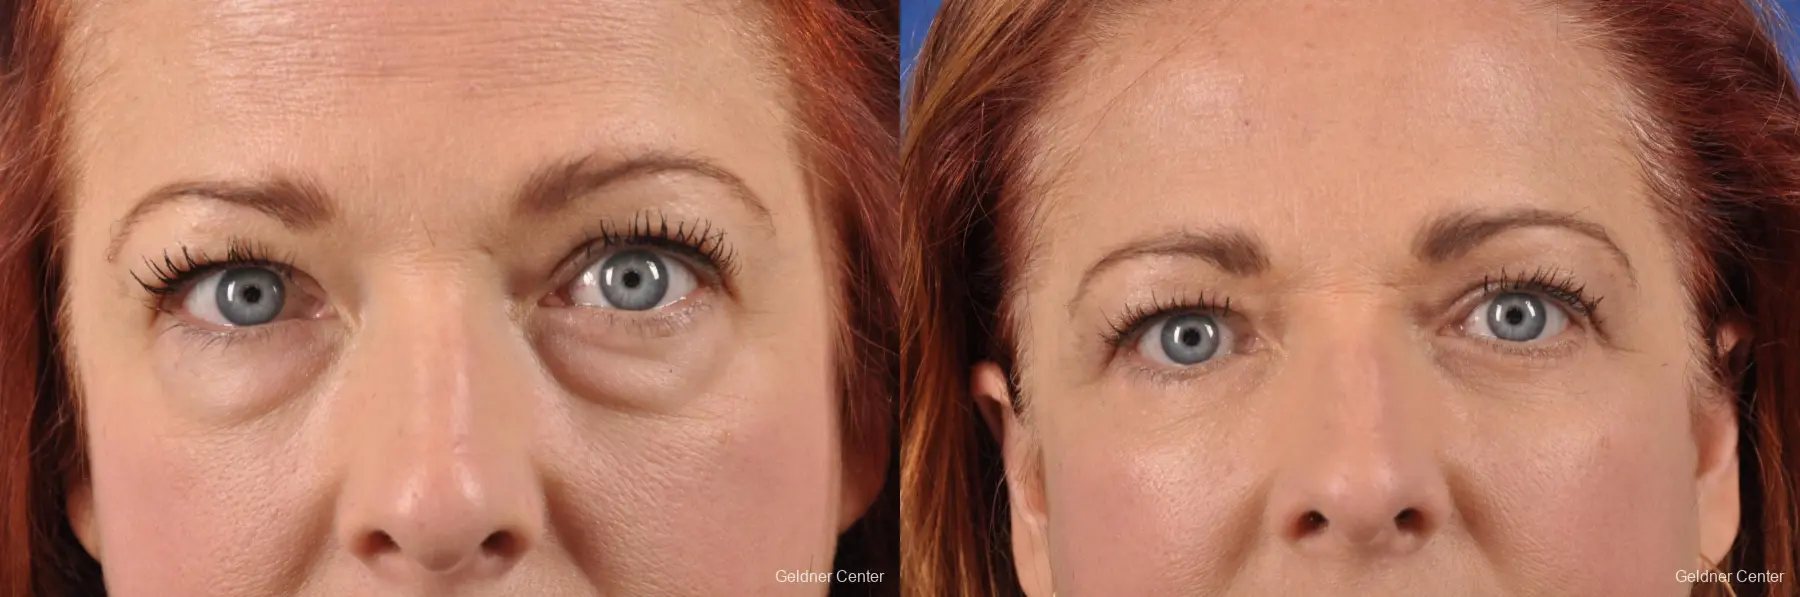 Eyelid Lift: Patient 8 - Before and After  